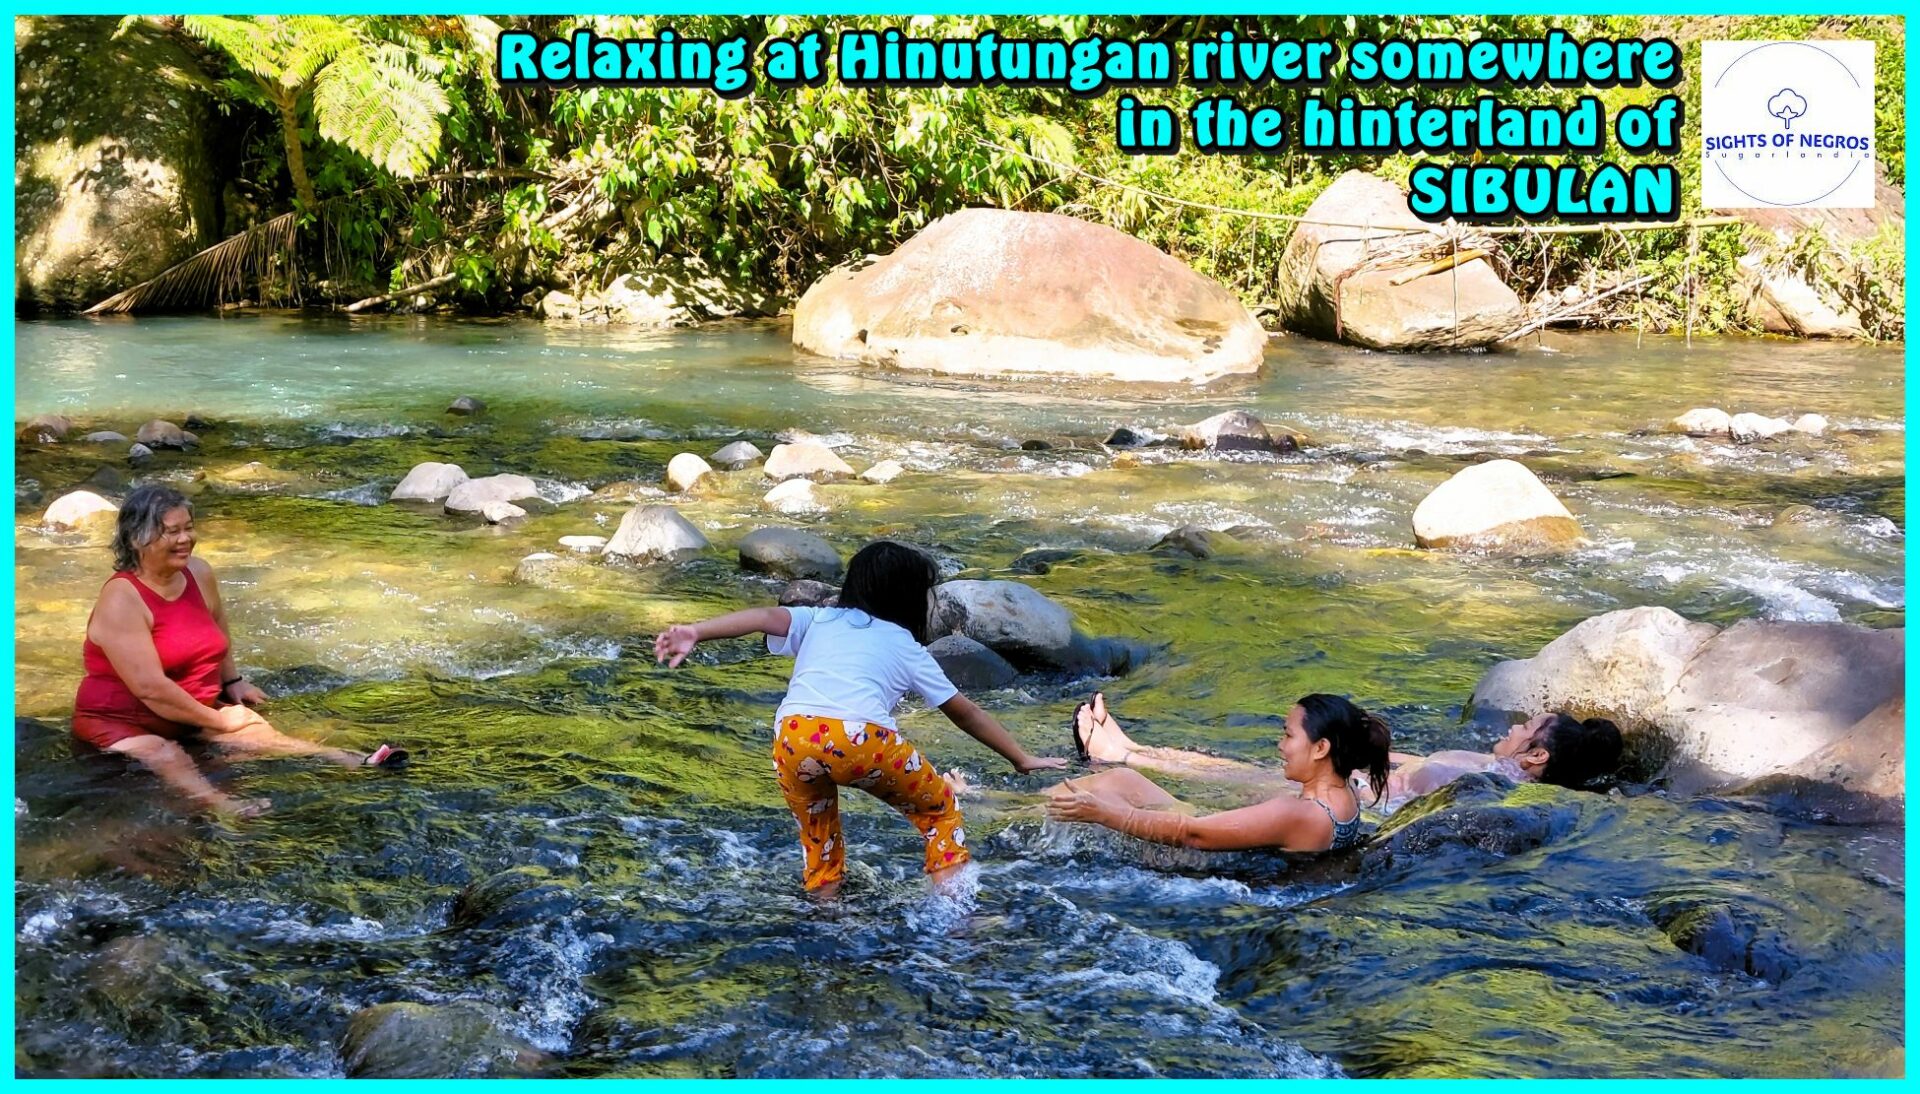 SIGHTS OF NEGROS - PHOTO OF THE DAY - Relaxing in the waters of the refreshing Hinutungan River in Sibulan